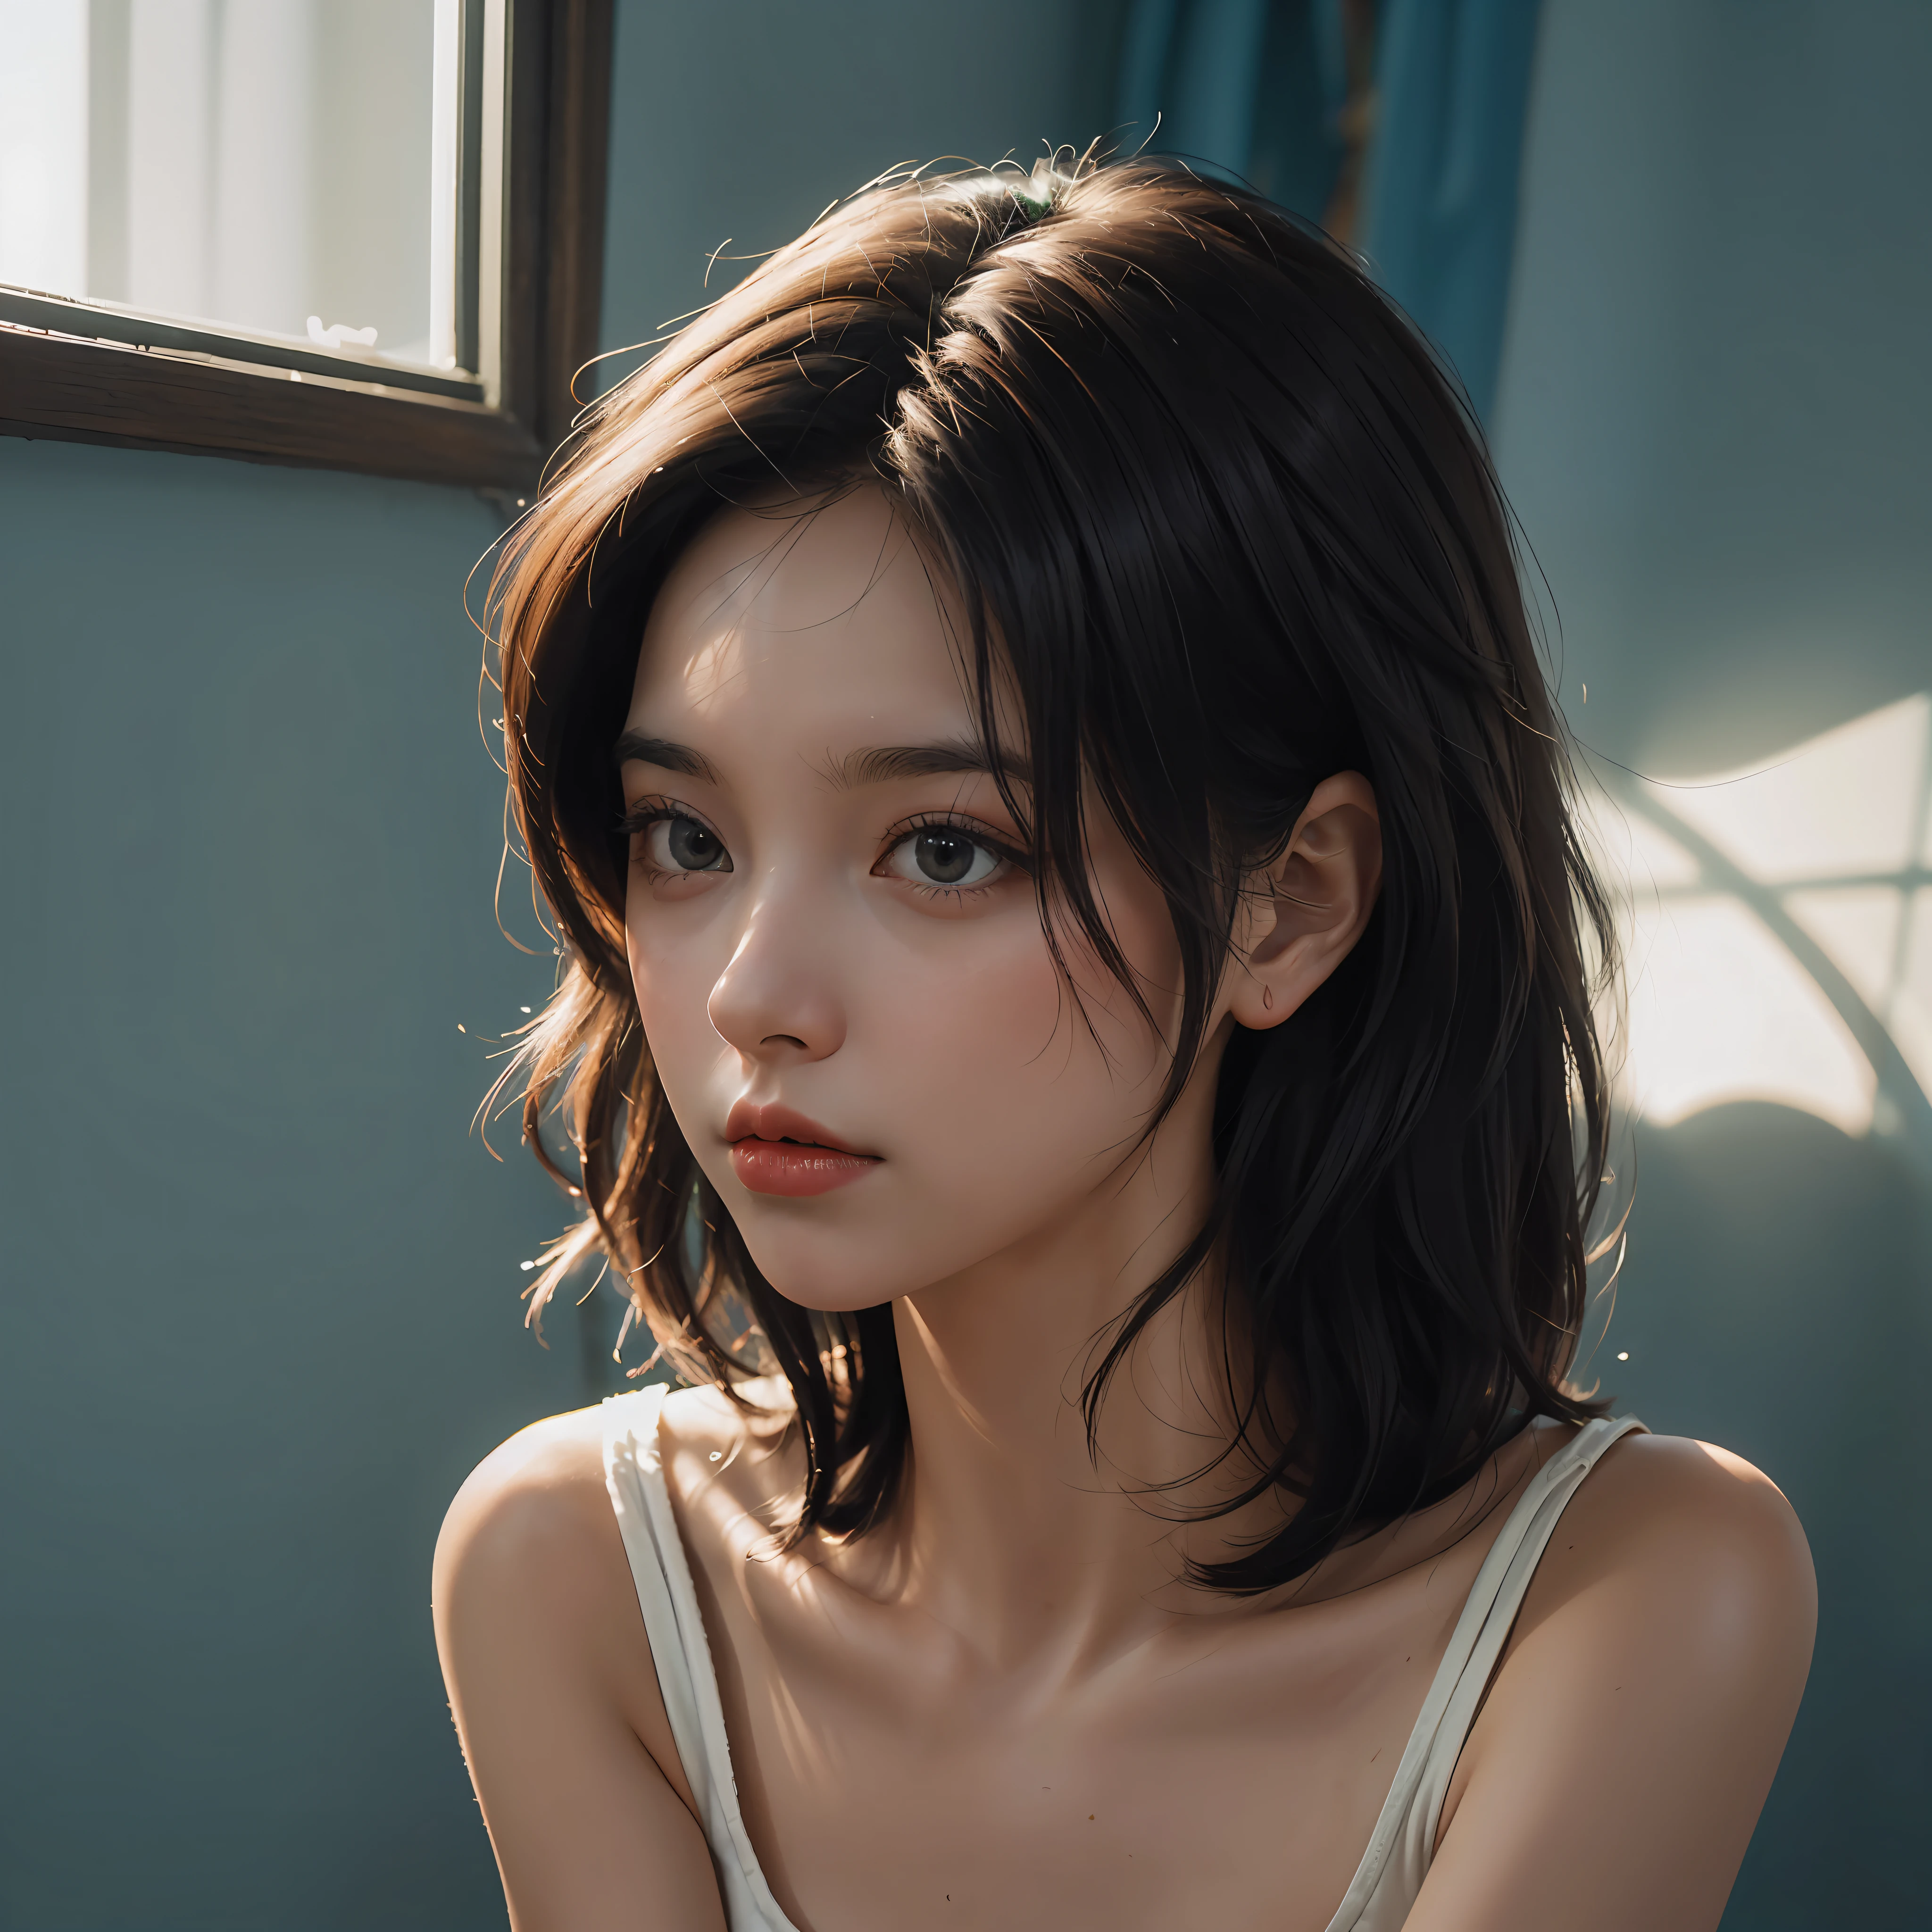 (Angle Dynamic, RAW photos of the national treasure, Photorealism: 1.3, High quality detailed CG 8k wallpapers, Under miniskirt: 0.4, short hair, film lighting, Lens flare)